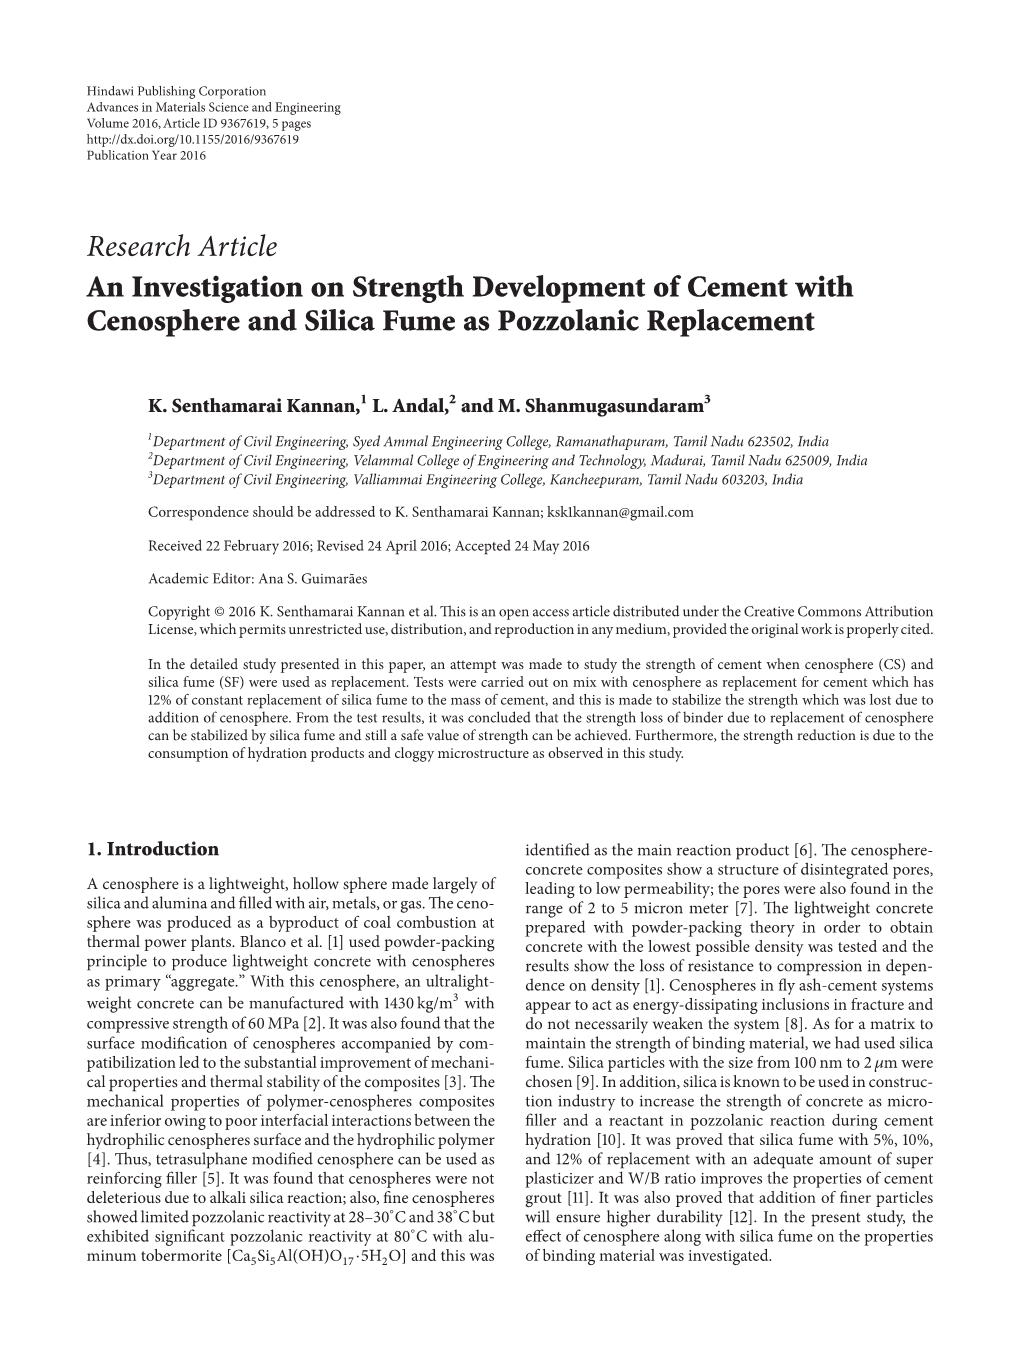 Research Article an Investigation on Strength Development of Cement with Cenosphere and Silica Fume As Pozzolanic Replacement